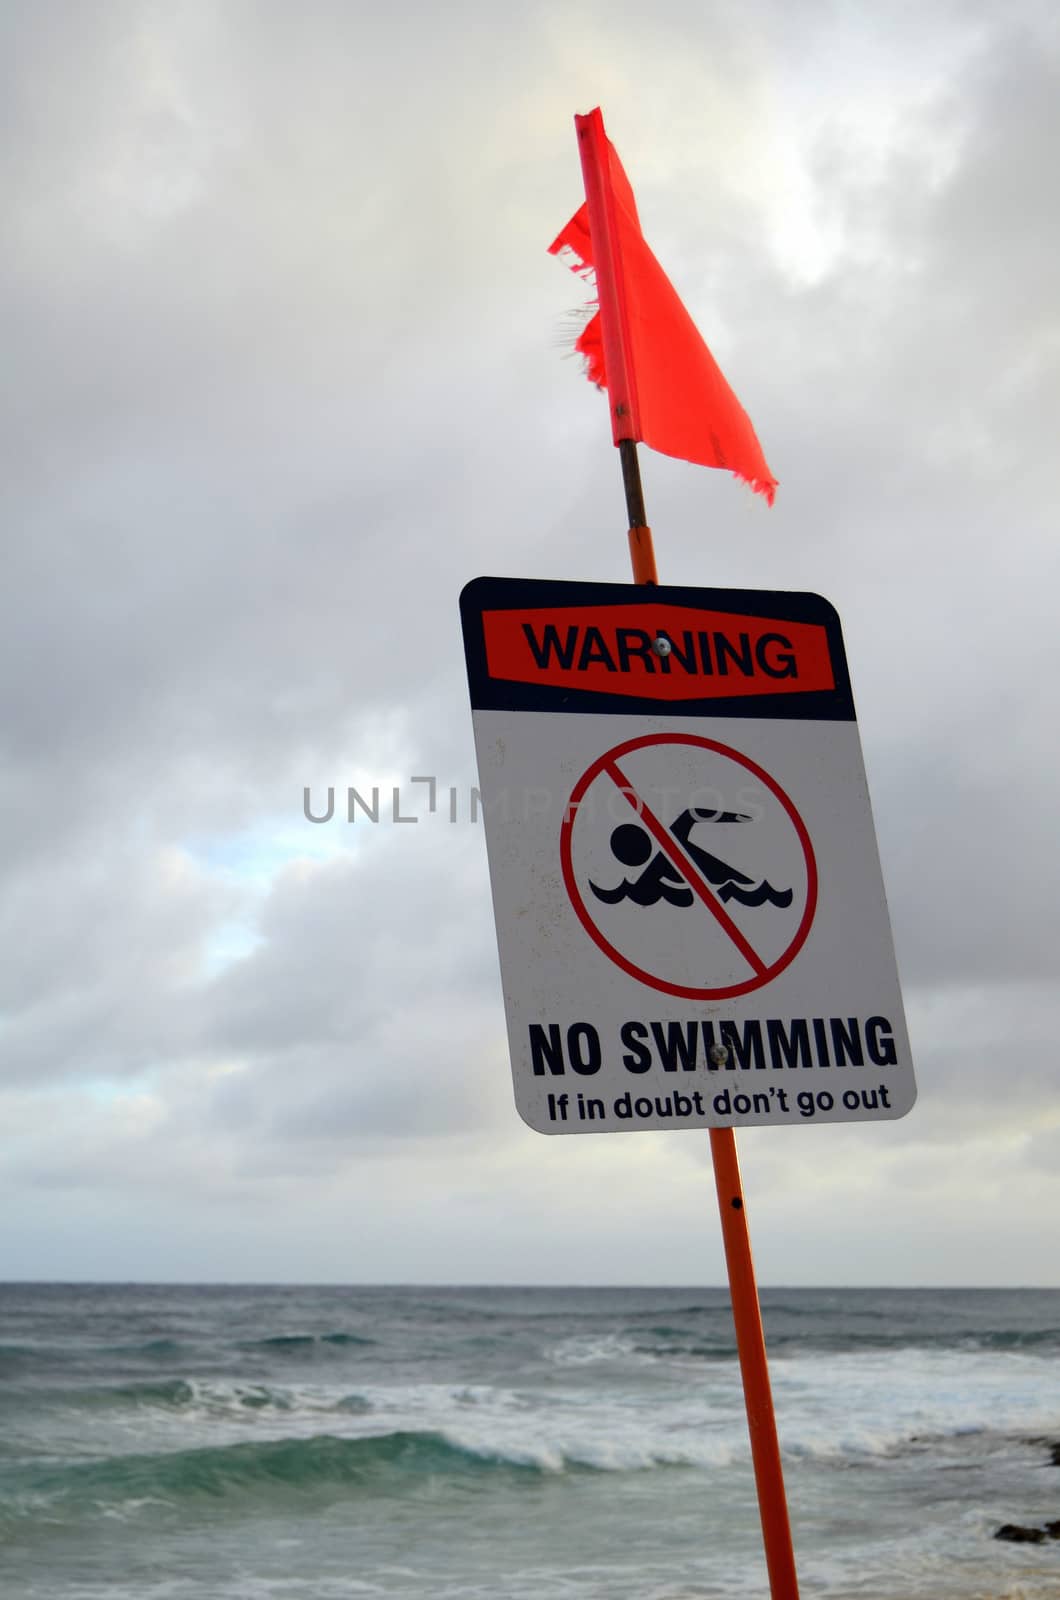 A no swimming warning sign beside a stormy beach